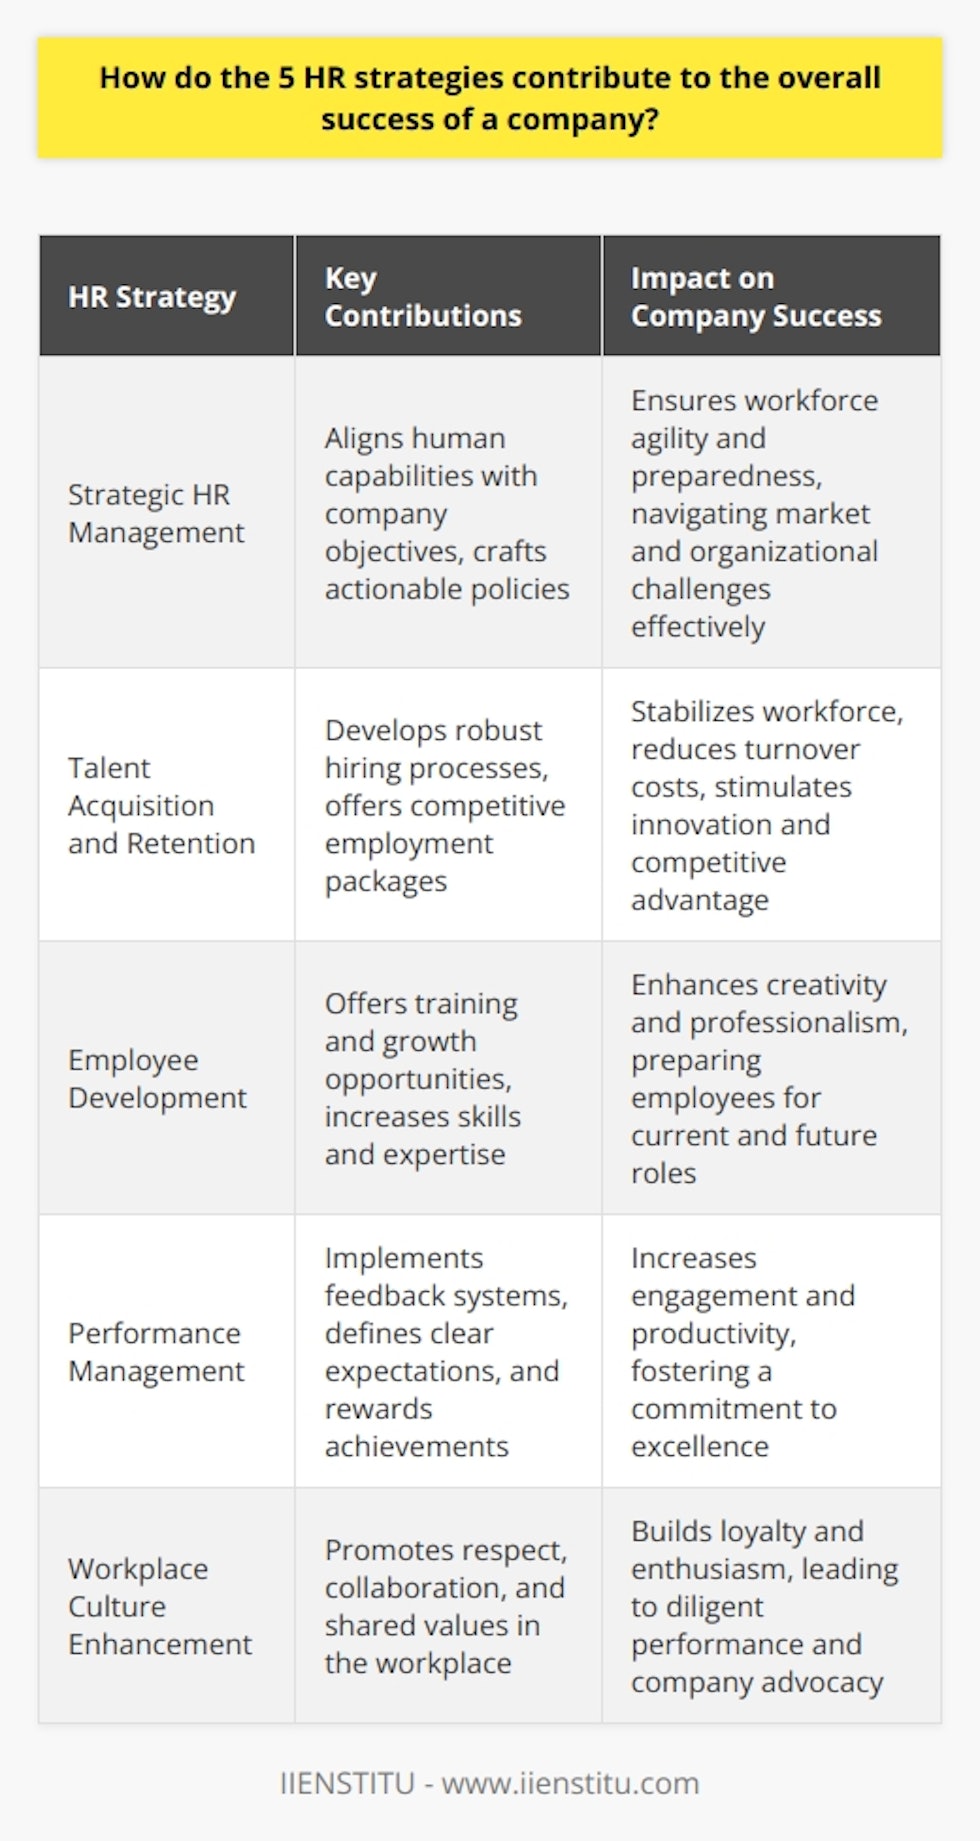 Human resources (HR) is the backbone of any thriving organization, and the strategies implemented within this department can profoundly impact the overall success of a company. Here's an in-depth exploration of how five critical HR strategies contribute to organizational triumph:Strategic HR Management:Strategic HR management sets the foundation for aligning human capabilities with the company's objectives. HR professionals work in tandem with company leadership to meticulously craft policies that ensure the right talent is in the right place at the right time. These strategic moves enable a company to navigate through market changes and organizational challenges while maintaining a workforce that is agile, informed, and prepared to drive the company towards its goals.Talent Acquisition and Retention:In a competitive business world, the ability to attract and retain top-tier talent is paramount. Companies with robust talent acquisition and retention strategies reap the benefits of a stable, skilled, and motivated workforce. The focus on building enticing employment packages and career progression paths reduces the hefty costs associated with high turnover. Furthermore, it fosters a vibrant pool of talent that drives innovation, which is paramount for maintaining a competitive edge in today’s ever-evolving marketplace.Employee Development:Investing in employee development is a strategic move that pays dividends. By offering ongoing training and professional growth opportunities, companies empower their employees to excel in their current roles and prepare for future challenges. Empowered employees with advanced skills and knowledge bring a higher level of expertise and creativity to their tasks, driving the company forward both in the present and in anticipation of future industry demands.Performance Management:Effective performance management is a dynamic strategy that serves to align employee goals with organizational targets. Regular feedback, clear communication of expectations, and appropriate reward systems are the pillars of this strategy. Employees who understand how their contributions fit within the larger picture and feel recognized for their efforts are more engaged, productive, and committed to excellence, which is crucial for building a successful company.Workplace Culture Enhancement:The heart and soul of a company often reside in its culture. HR strategies that nurture a positive workplace culture are instrumental in promoting an environment of mutual respect, collaboration, and shared values. When employees feel supported by a constructive and inclusive culture, they are more likely to develop loyalty to the company, care about its success, and perform with greater enthusiasm and diligence.Incorporating these five strategic HR elements – strategic management, talent acquisition and retention, employee development, performance management, and workplace culture enhancement – enables a business to fully harness the potential of its human capital. This, in turn, leads to greater innovation, productivity, and profitability, paving the way for sustainable success in a competitive business landscape.